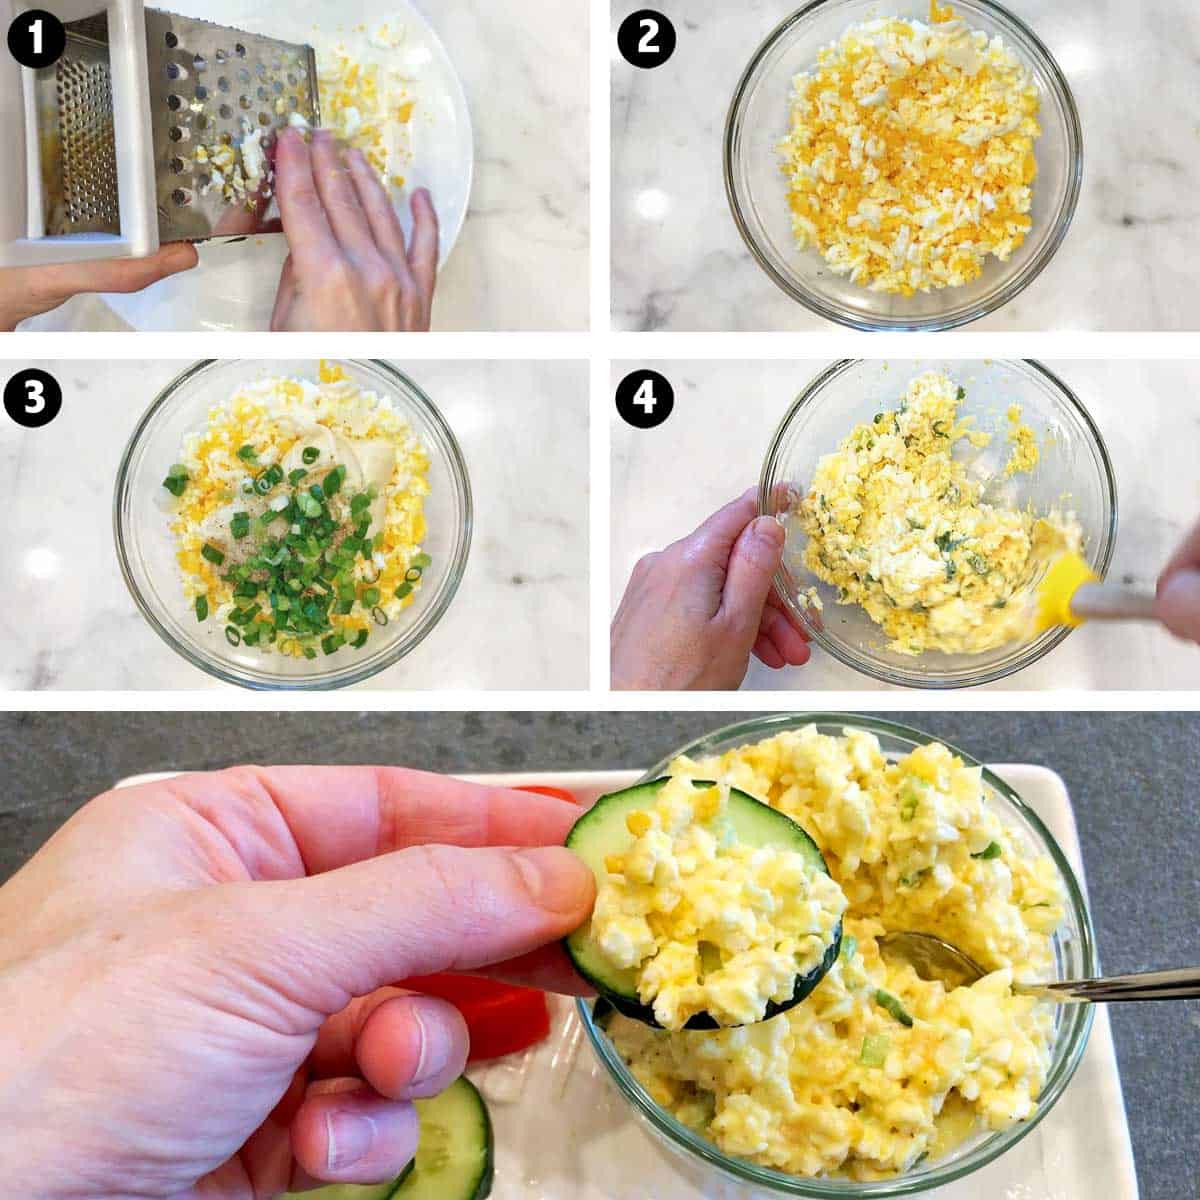 A photo collage showing the steps for making a low-carb egg salad. 